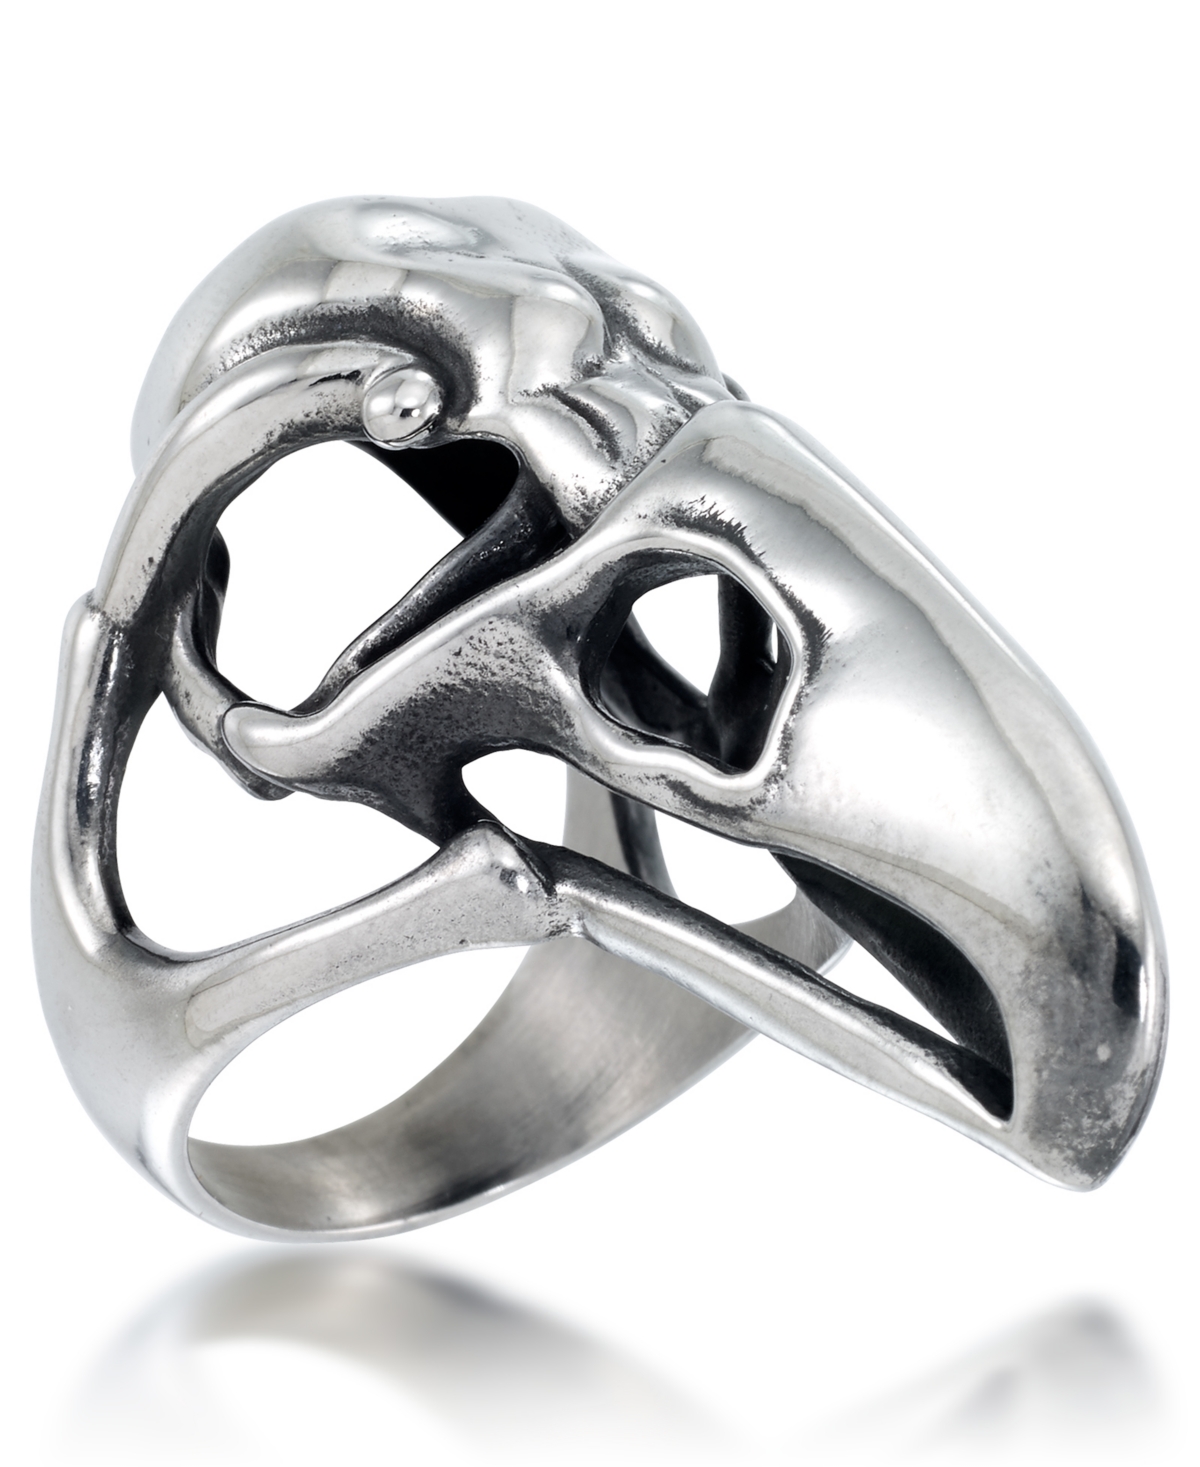 Men's Openwork Eagle Ring in Stainless Steel - Stainless Steel